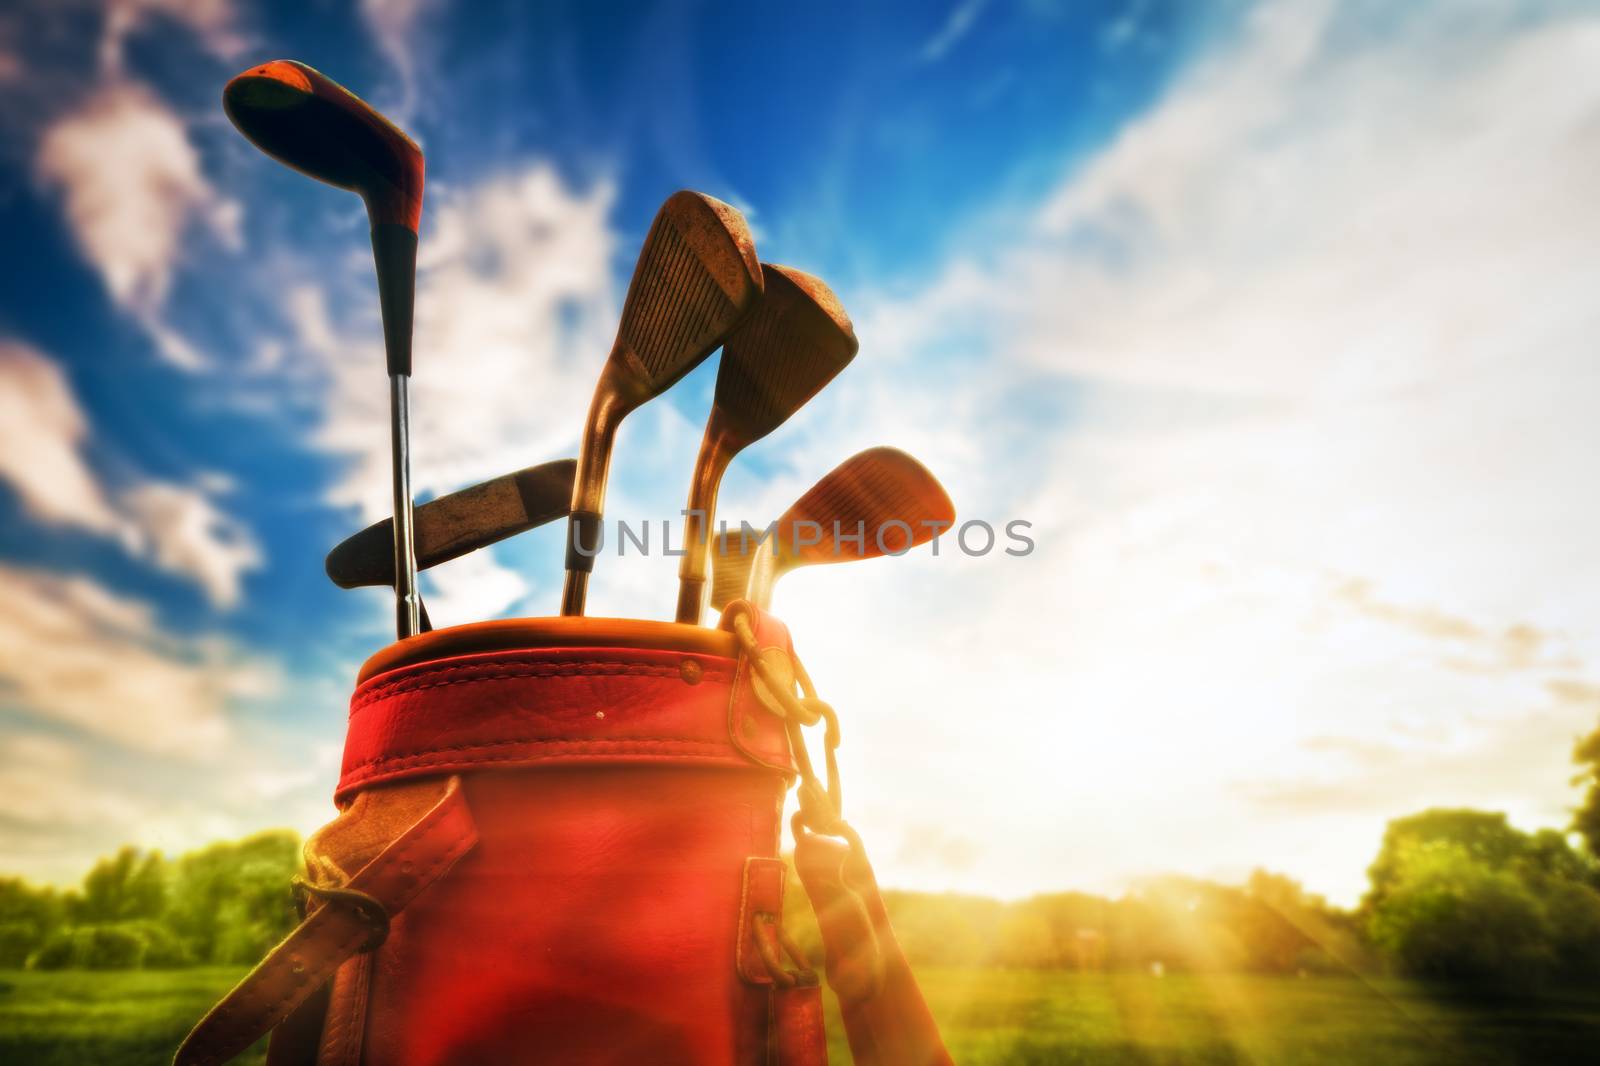 Golf equipment. Professional golf clubs in a leather baggage at sunset